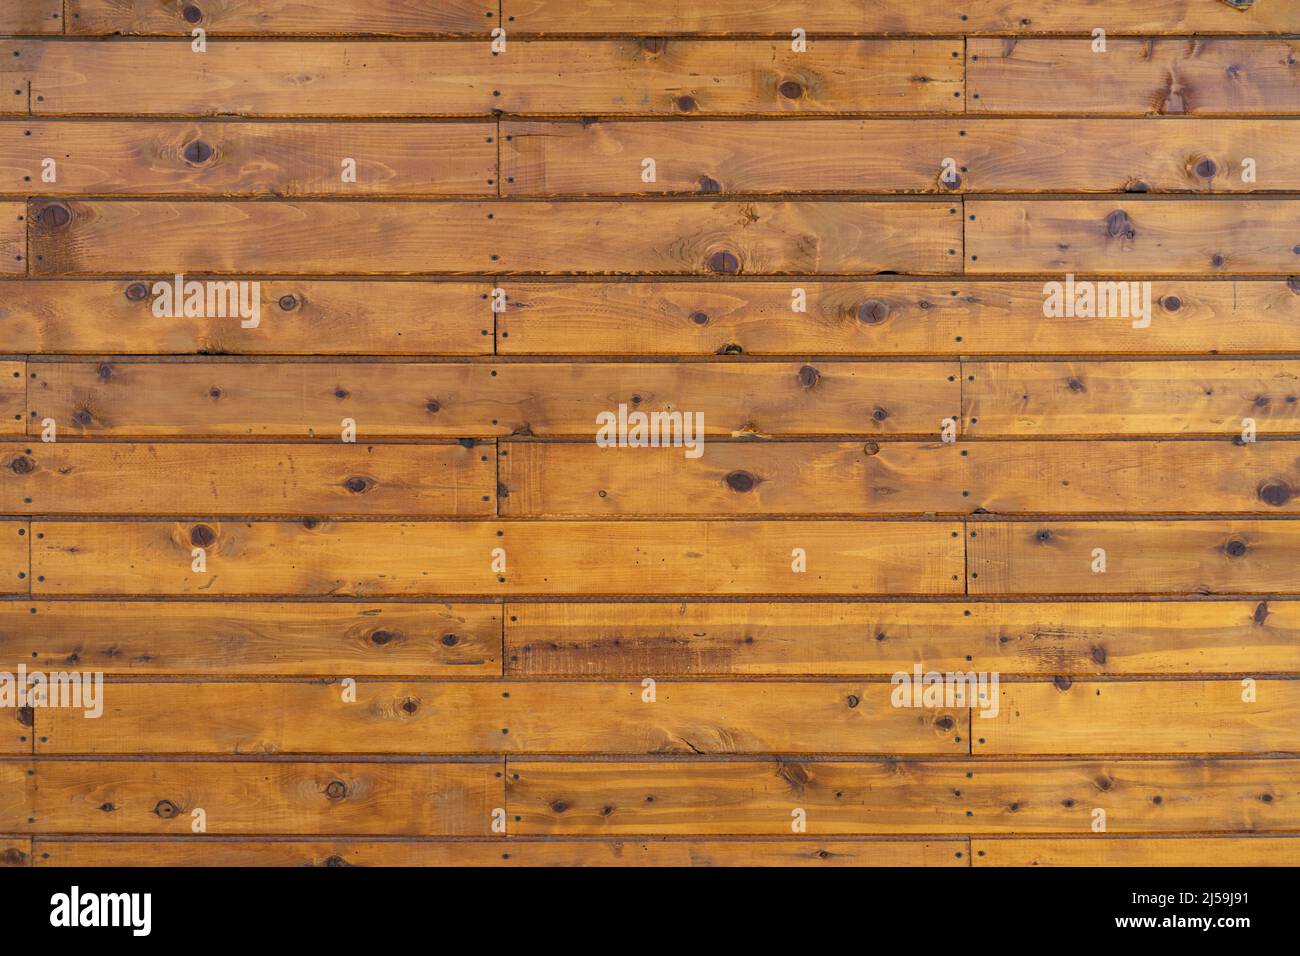 Natural wood paneling with knots and nails in a honey brown color Stock Photo